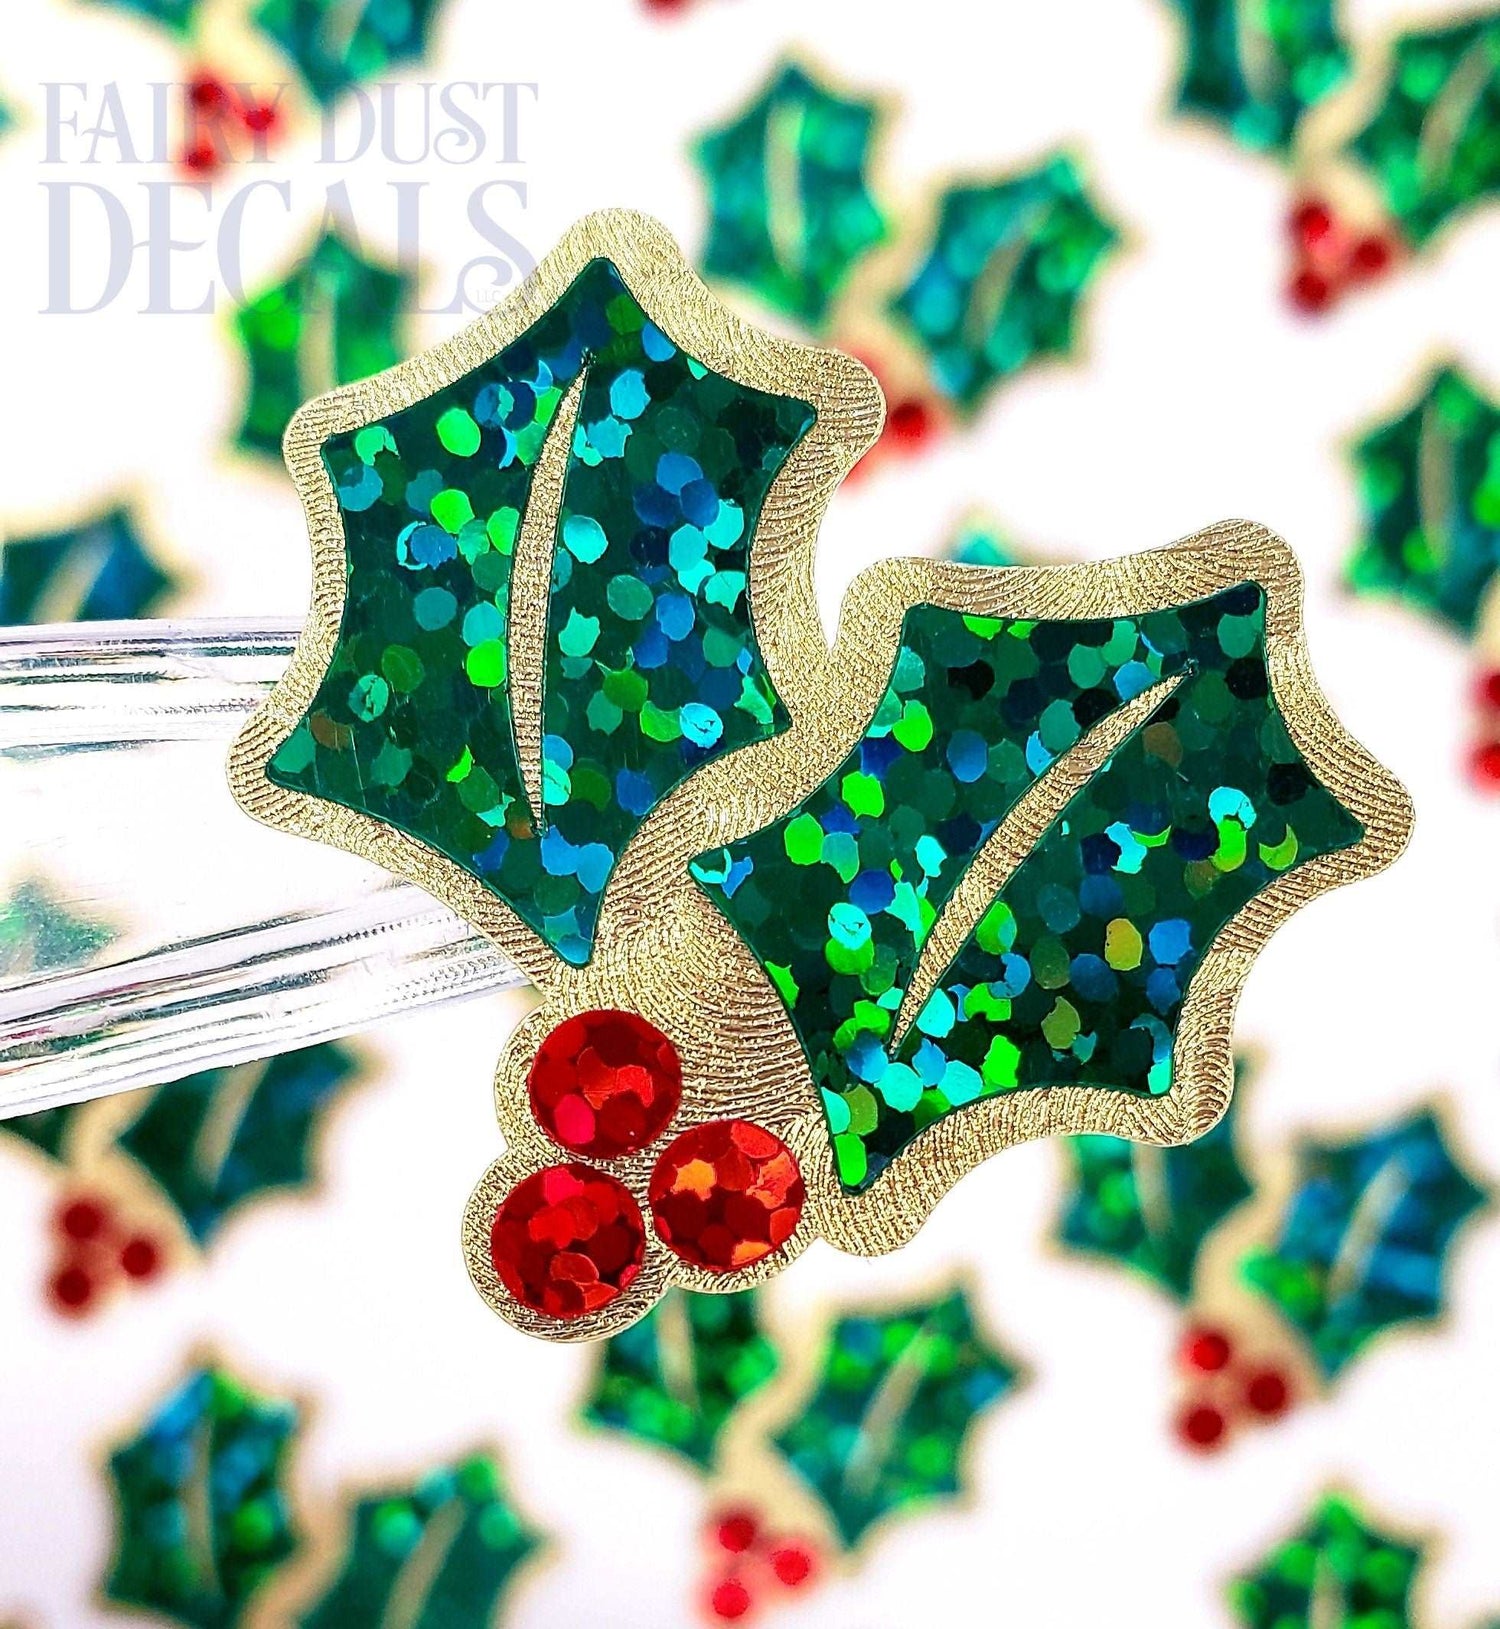 Christmas Holly Stickers, set of 20